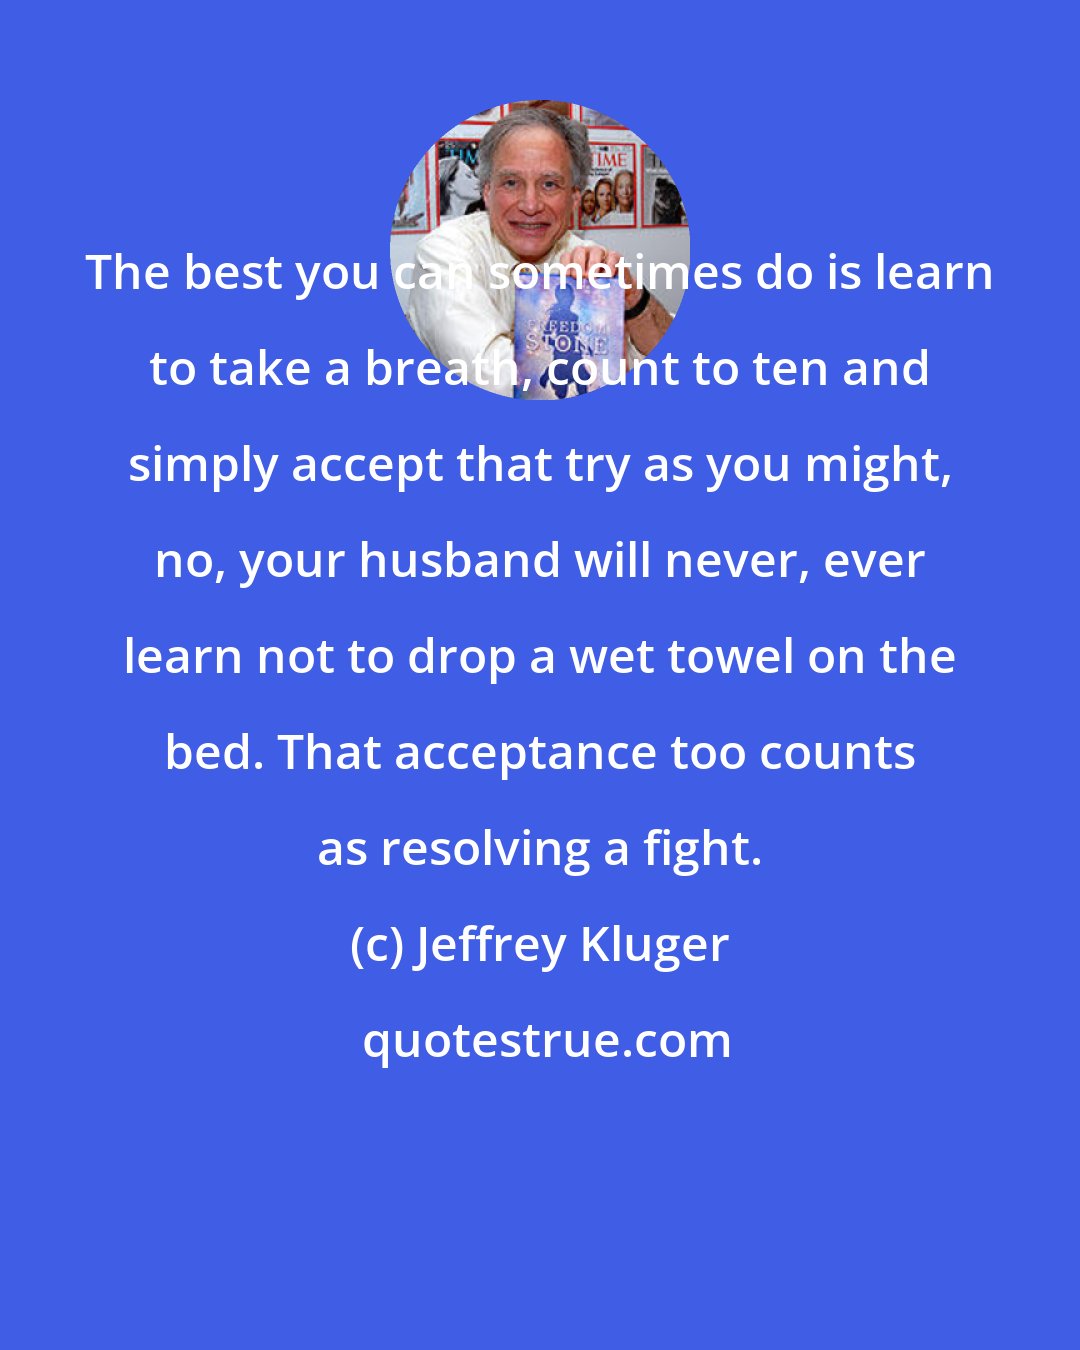 Jeffrey Kluger: The best you can sometimes do is learn to take a breath, count to ten and simply accept that try as you might, no, your husband will never, ever learn not to drop a wet towel on the bed. That acceptance too counts as resolving a fight.